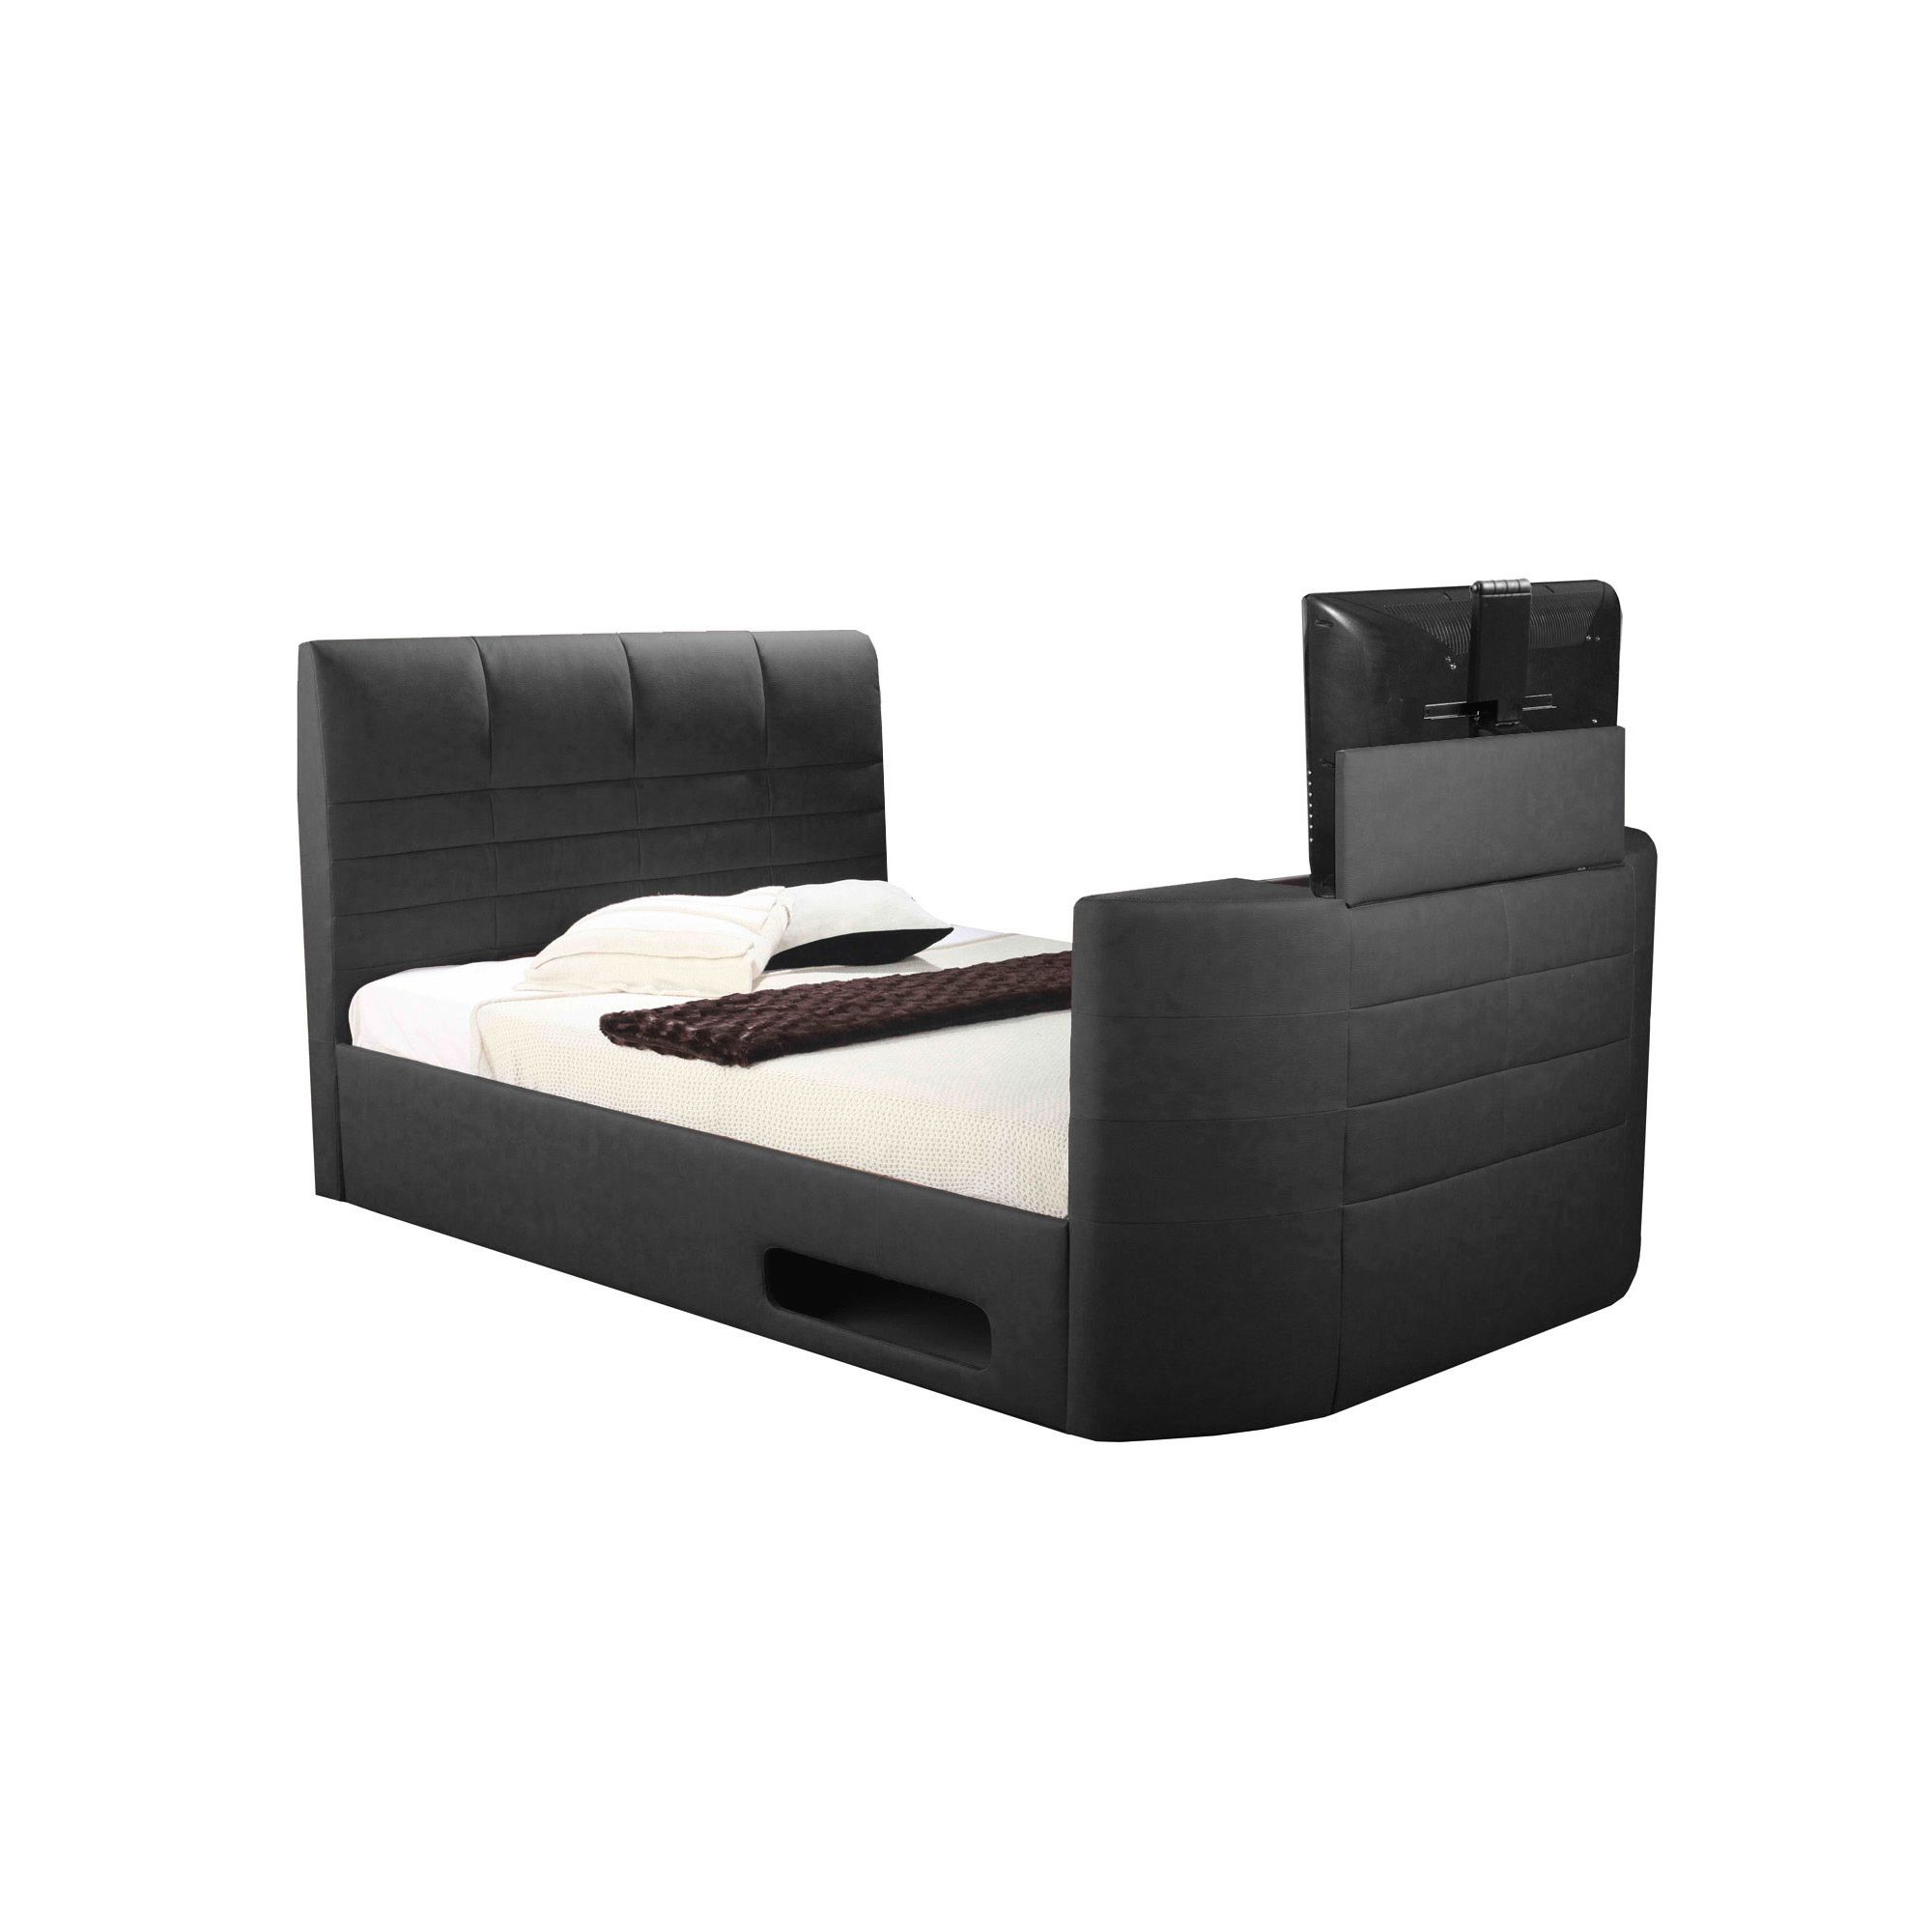 Altruna Miami Electric Wireless TV Bed - Double - Black - With Ottoman at Tesco Direct